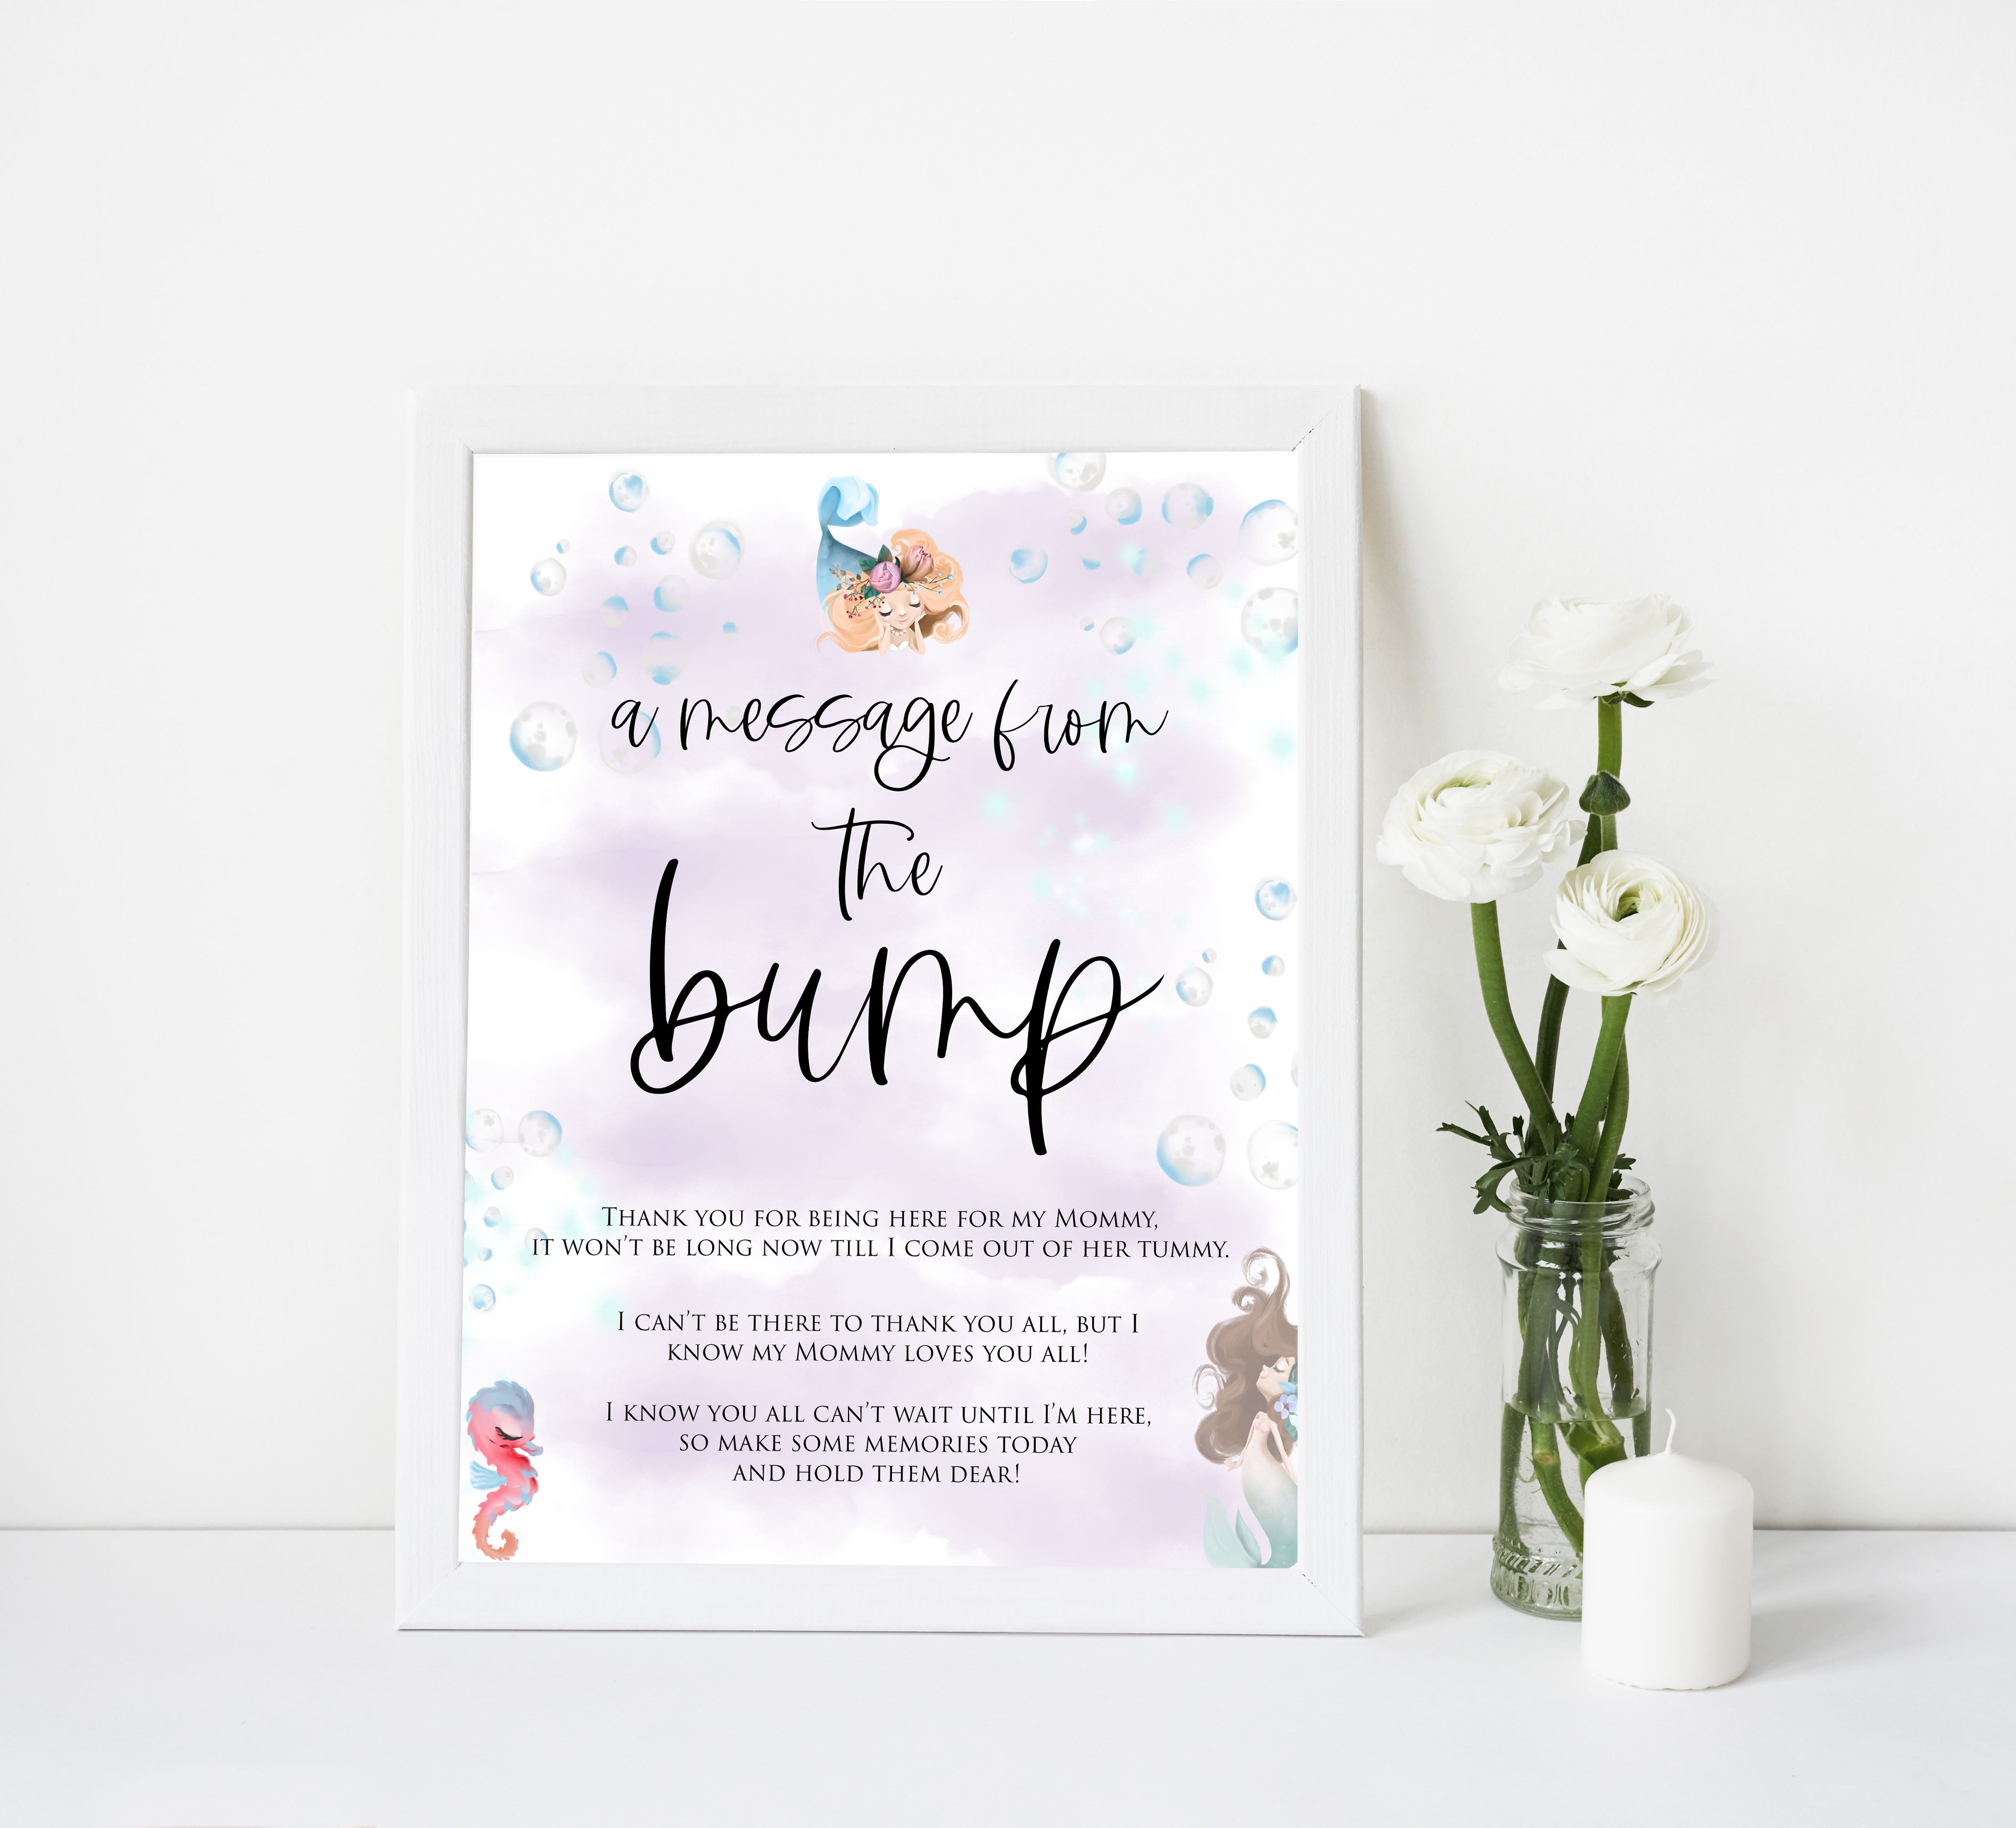 message from the bump game, Printable baby shower games, little mermaid baby games, baby shower games, fun baby shower ideas, top baby shower ideas, little mermaid baby shower, baby shower games, pink hearts baby shower ideas